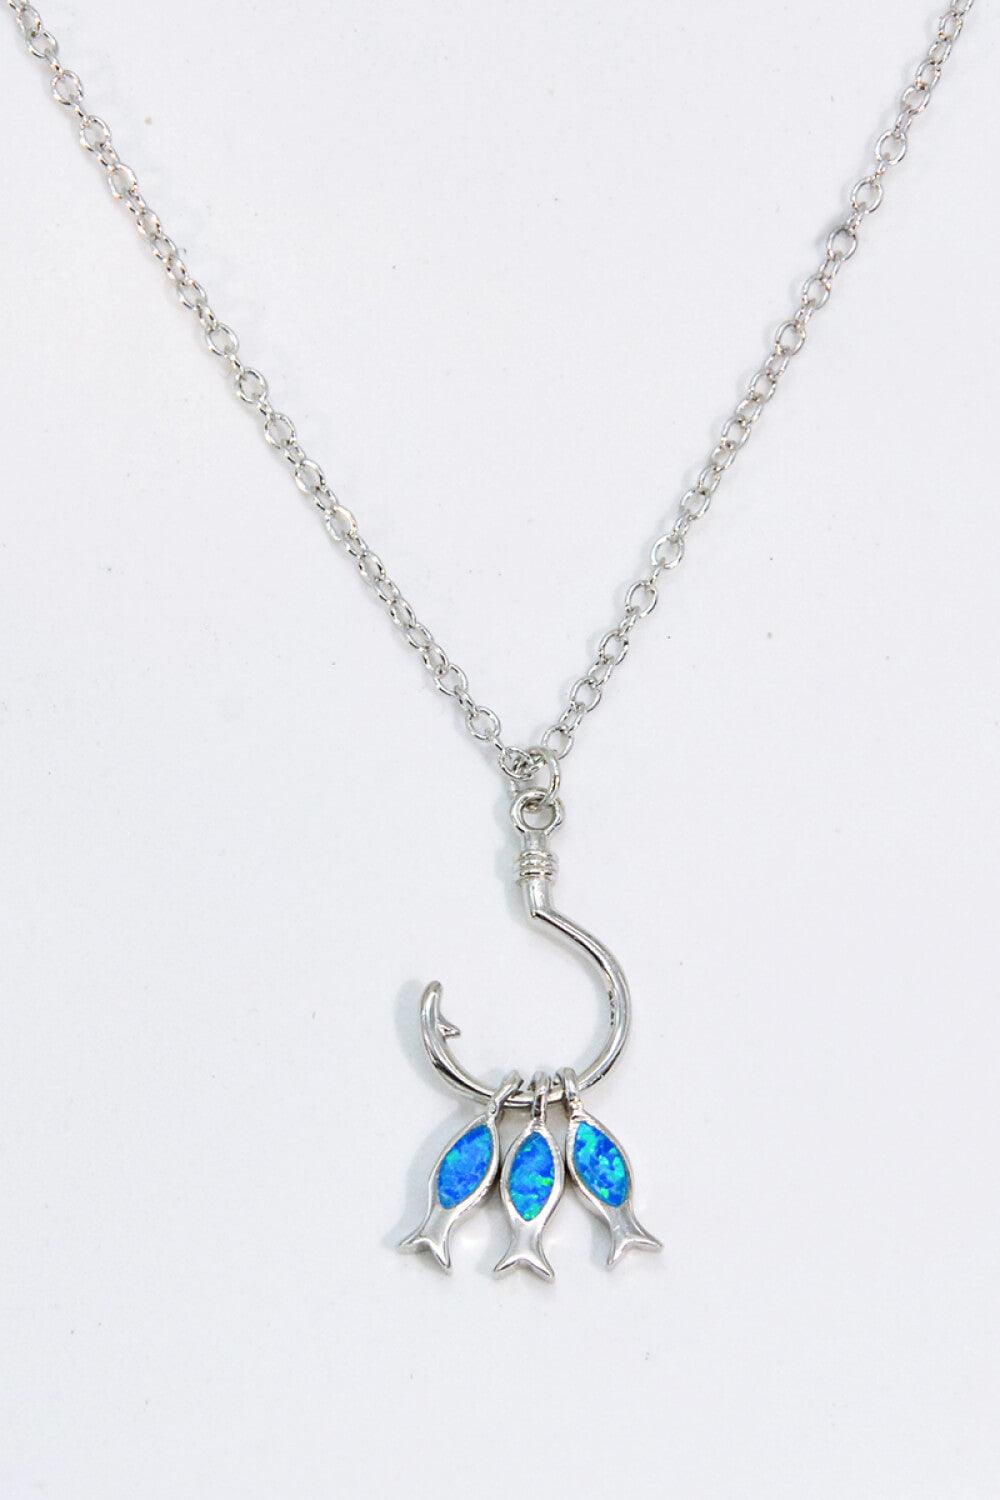 Opal Fish 925 Sterling Silver Necklace - Flyclothing LLC